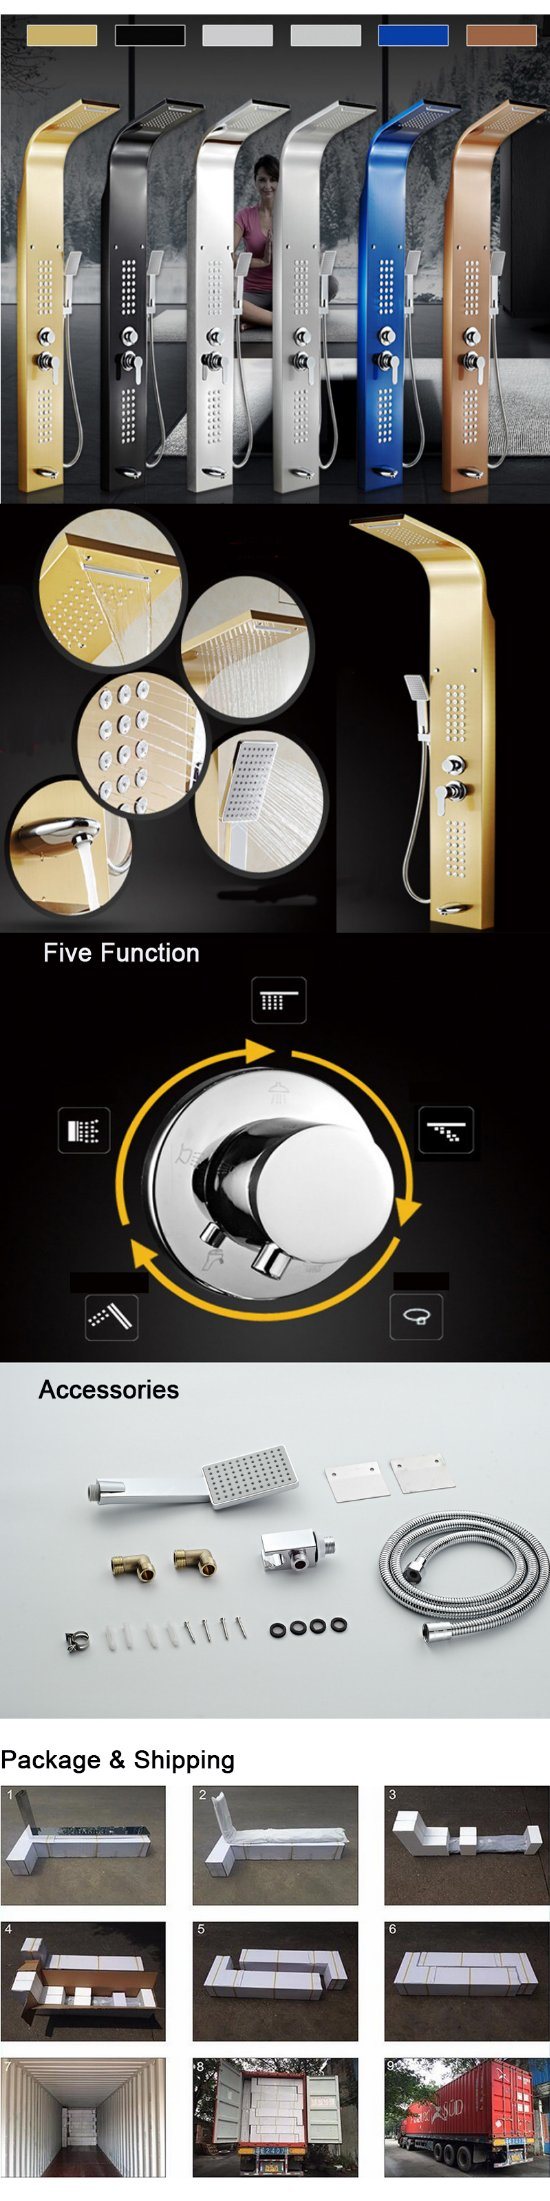 Multi-Function Thermostatic Auto Heated Stainless Steel Shower Panel